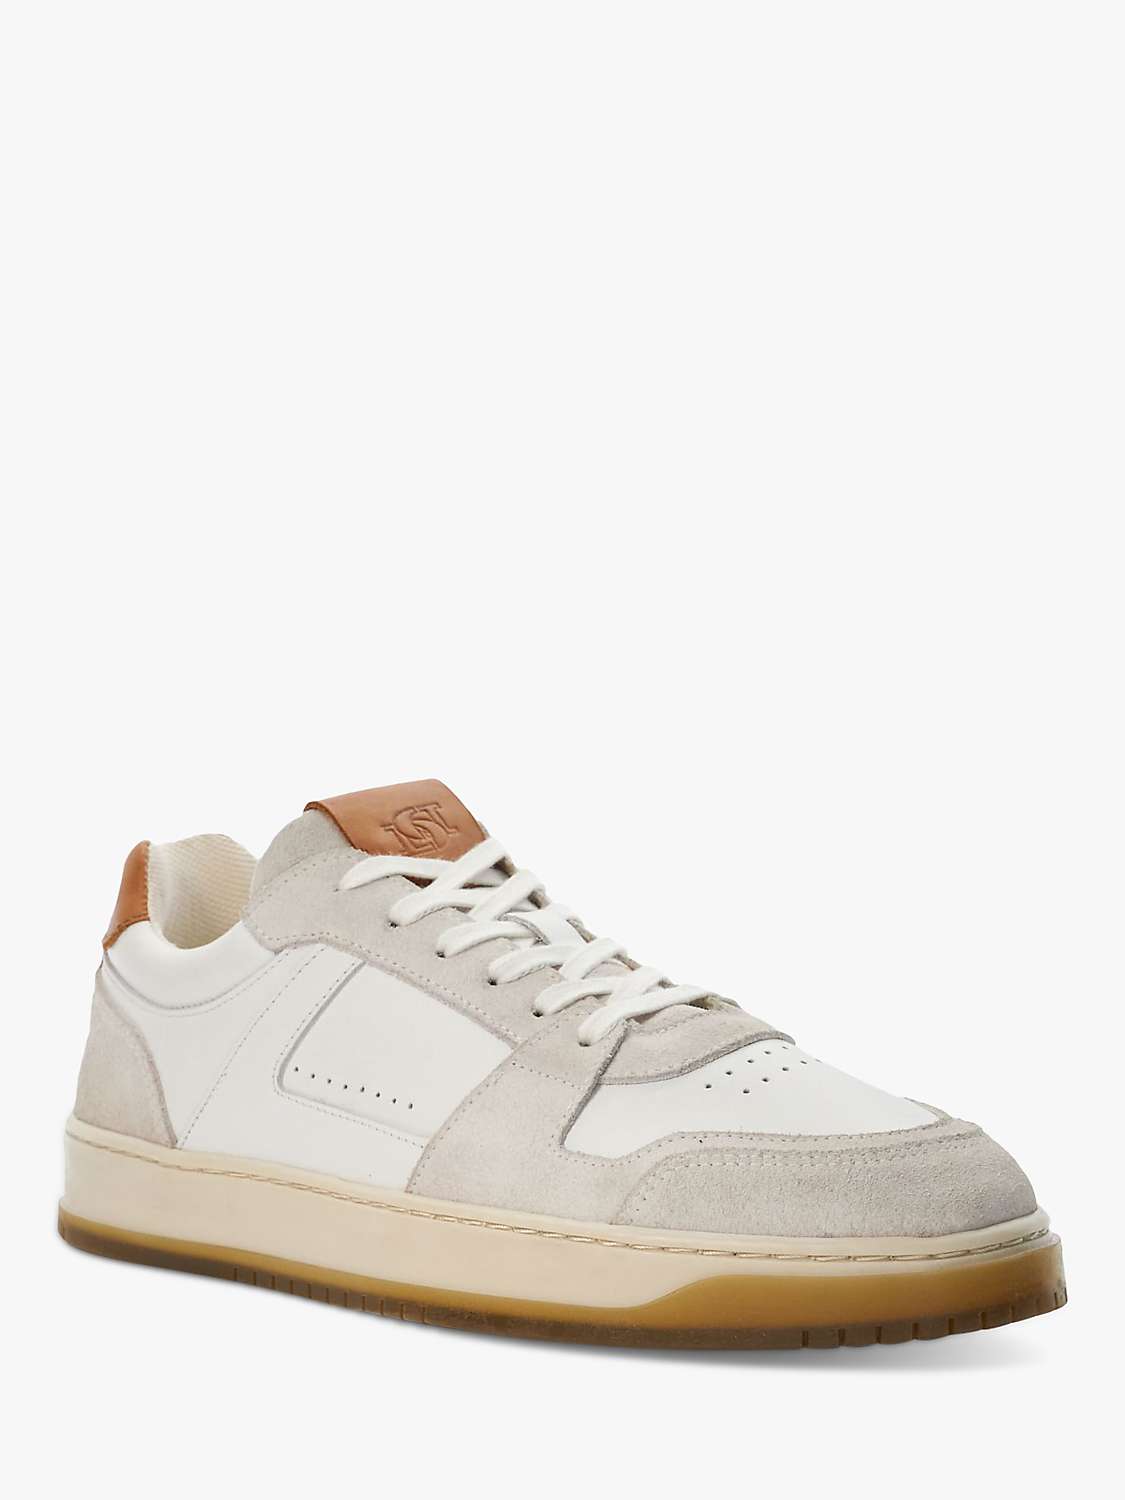 Buy Dune Tylor Suede and Leather Low Top Trainers, White/Grey Online at johnlewis.com